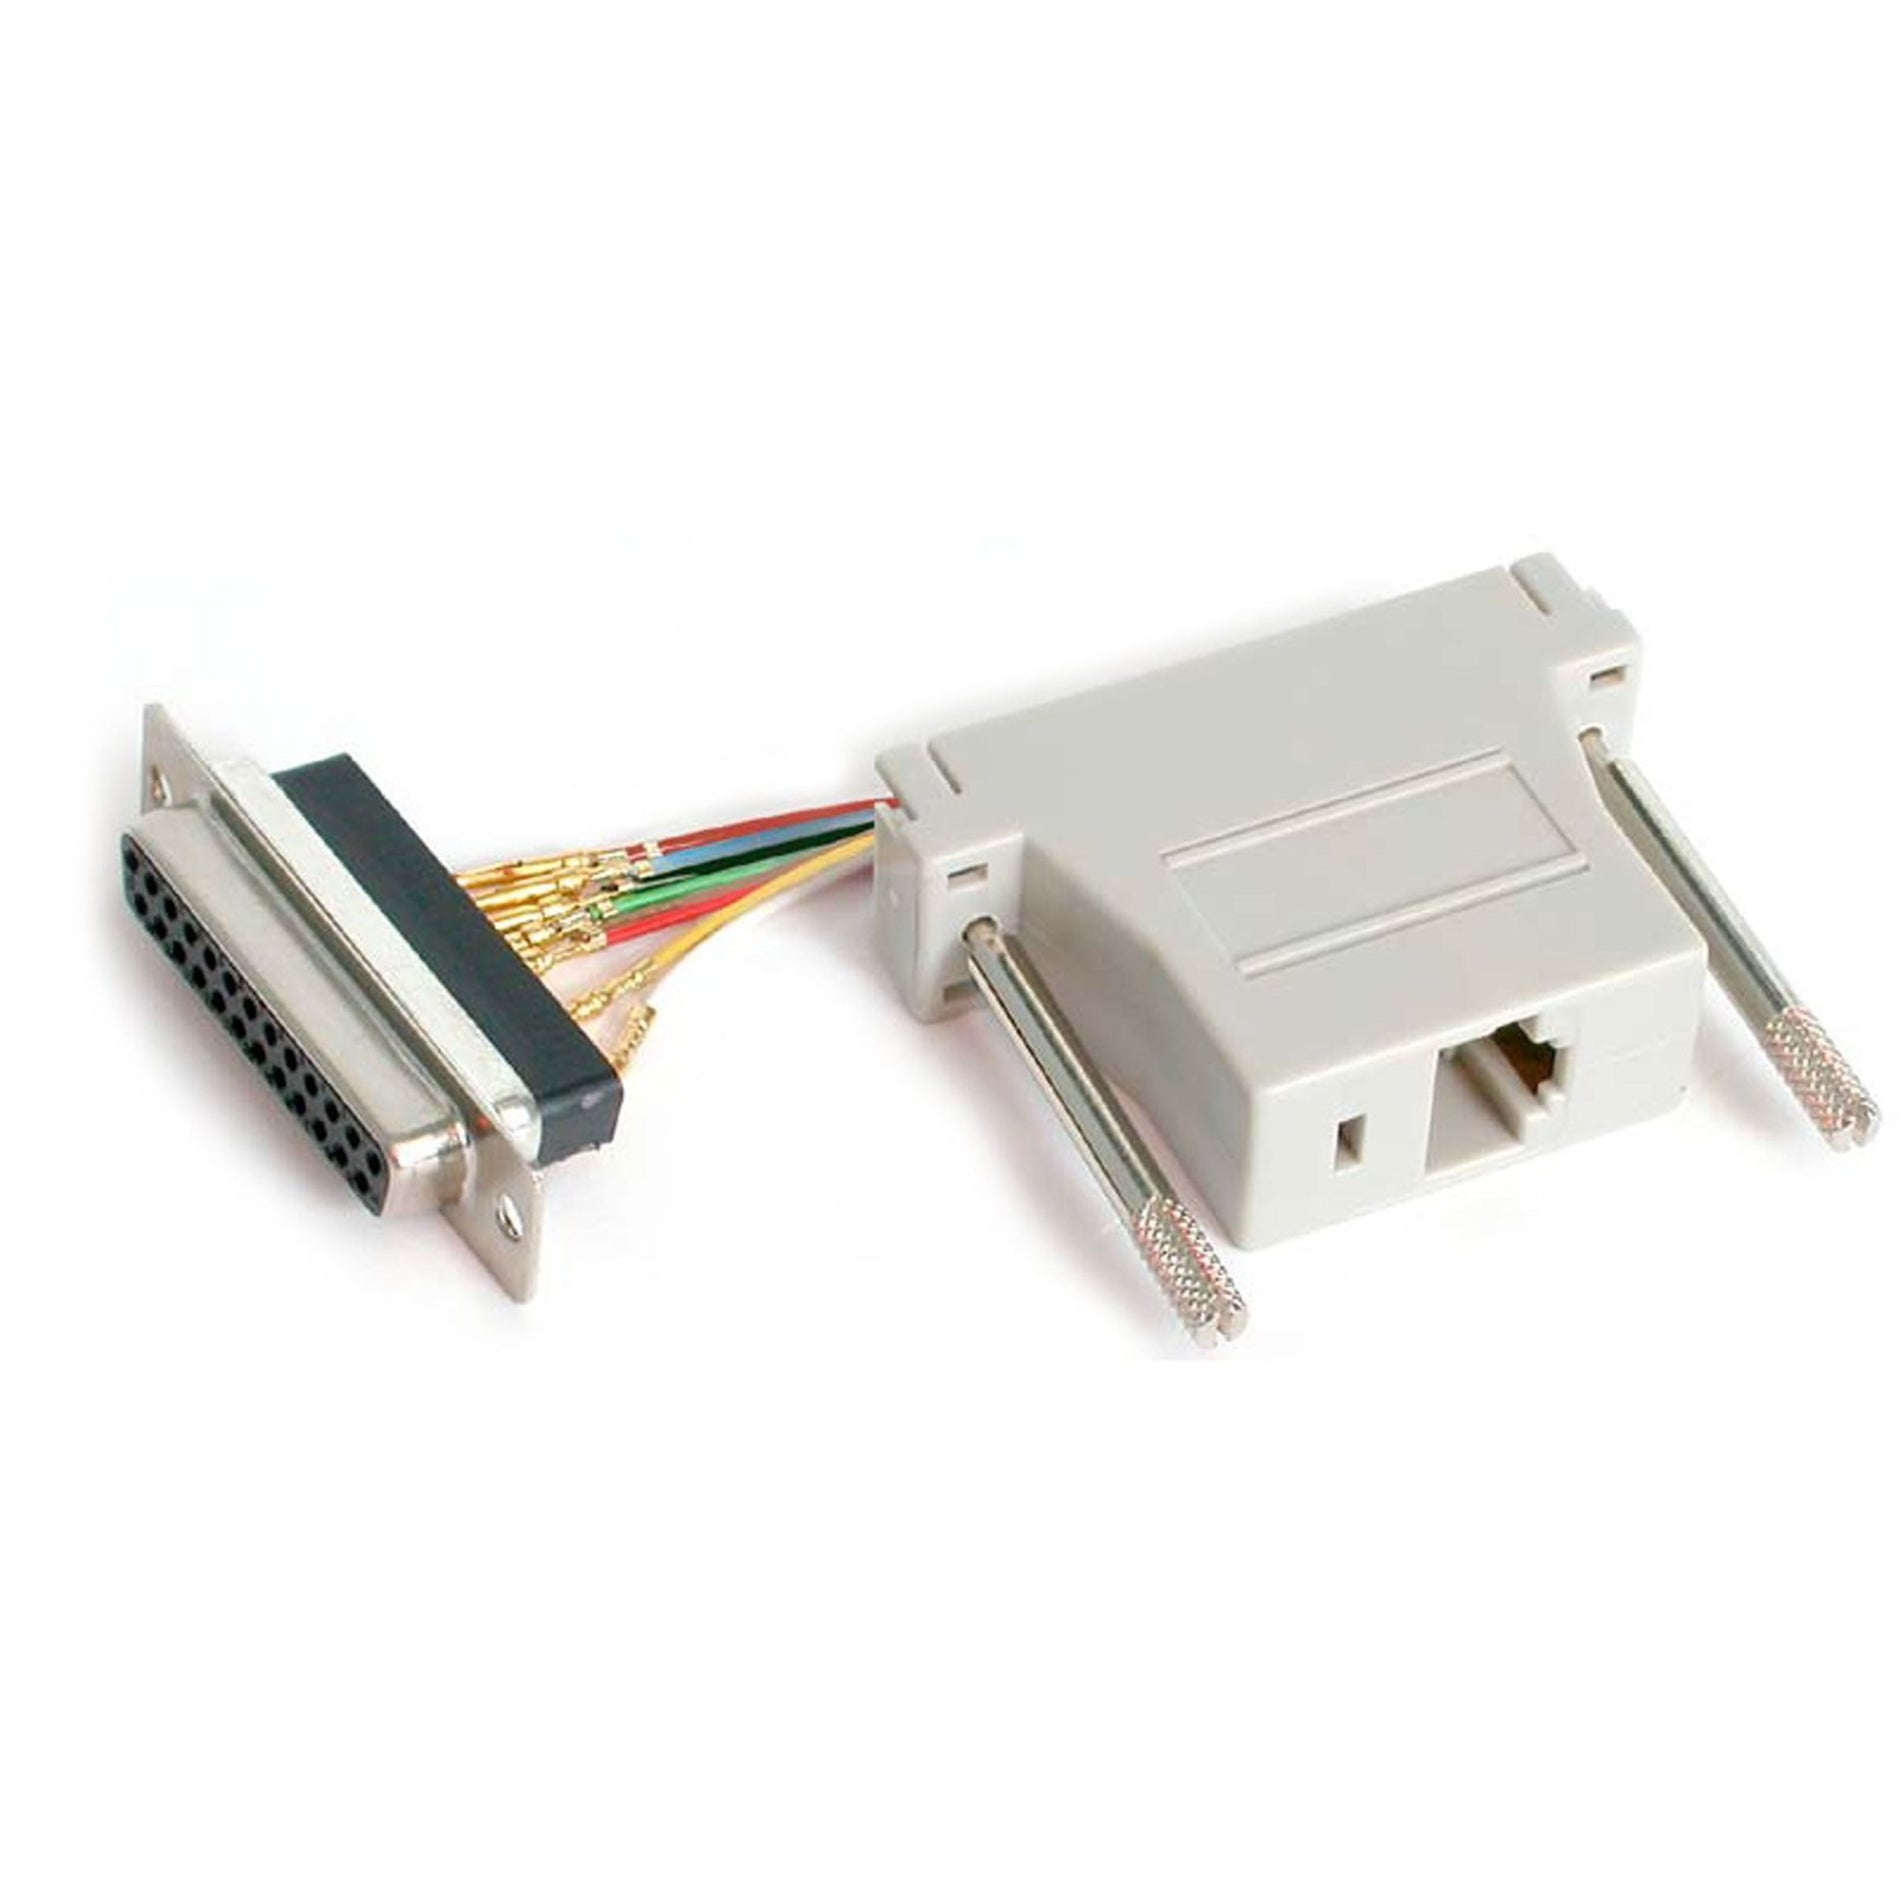 StarTech.com GC258FF DB25F to RJ45F Adapter, Data Transfer Adapter, Lifetime Warranty, FCC Certified [Discontinued]